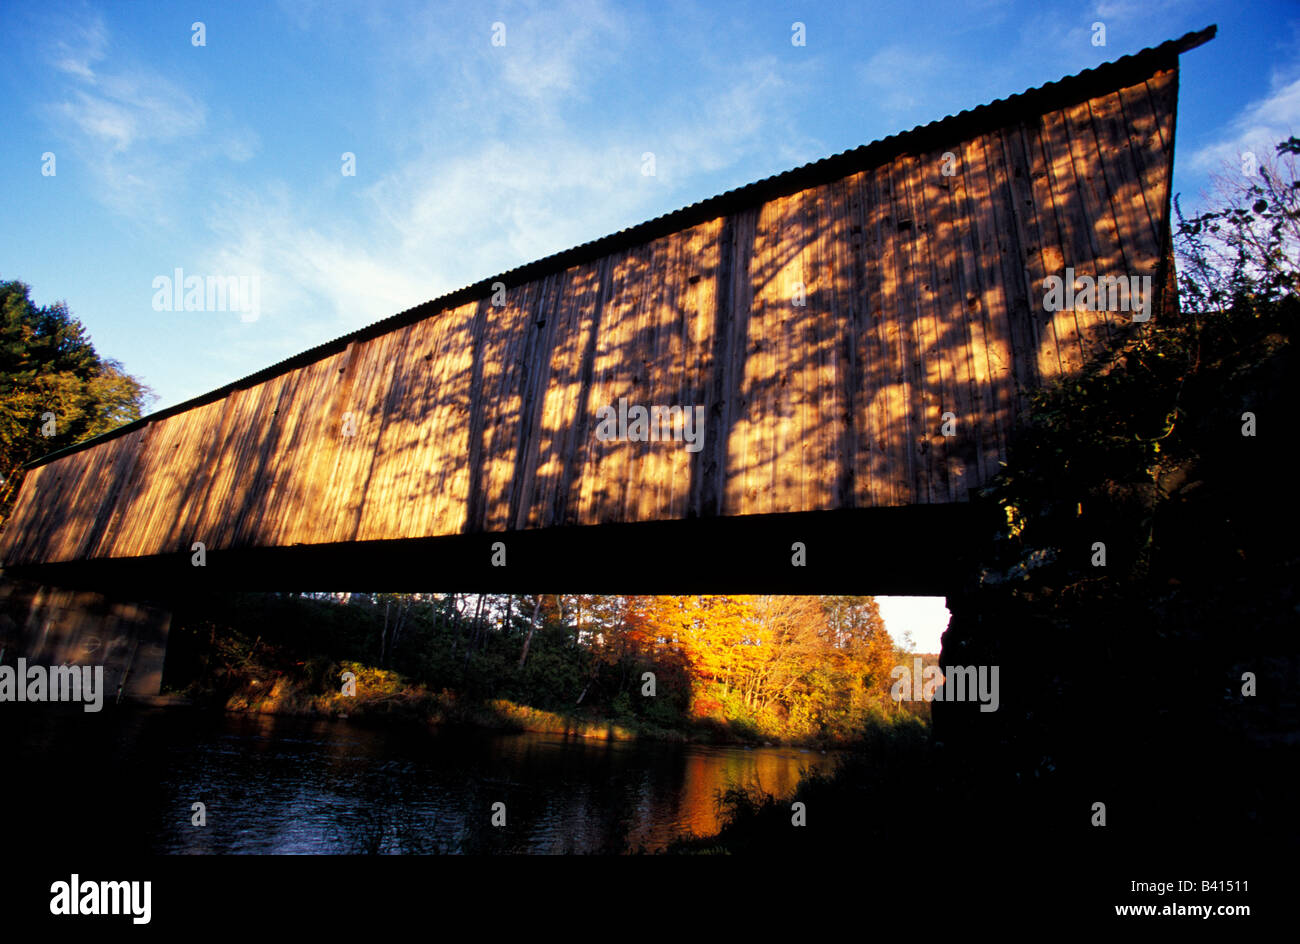 North America, United States, Vermont, Woodstock. Lincoln Covered Bridge built in 1877 in the Pratt Truss style. Stock Photo